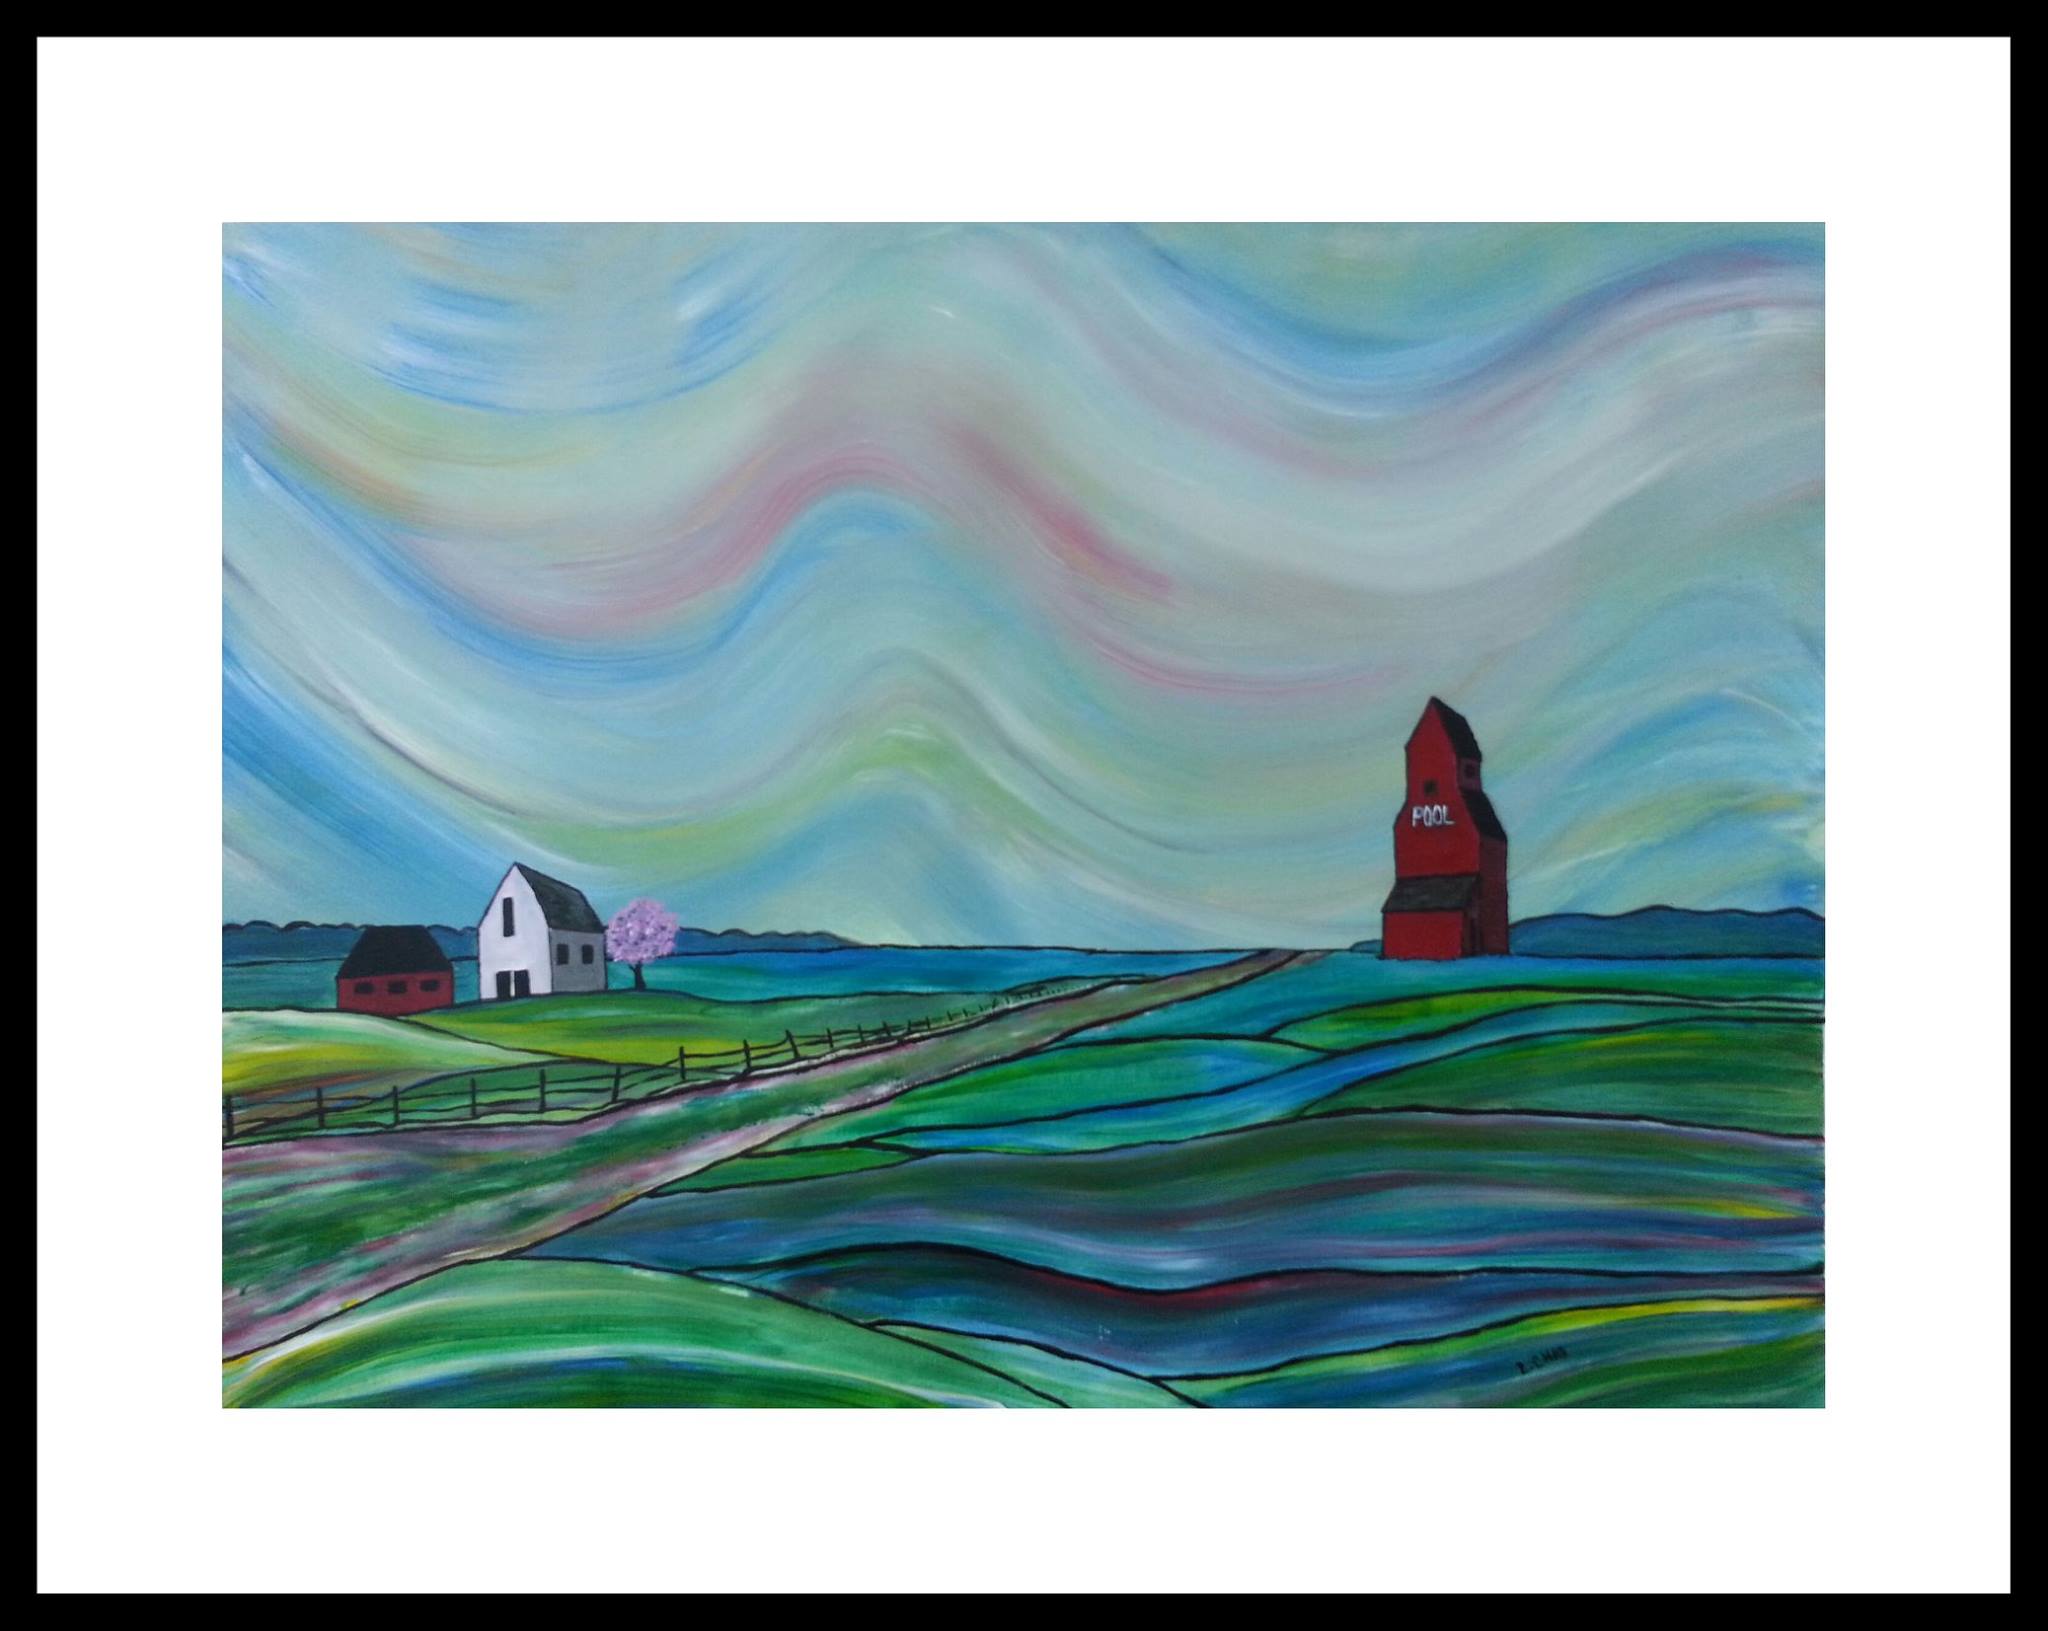 "Prairie Sea" [2015]
Acrylic on paper. 22.5" x 16.5" (image). 30.5" x 24.5" (framed).
SOLD